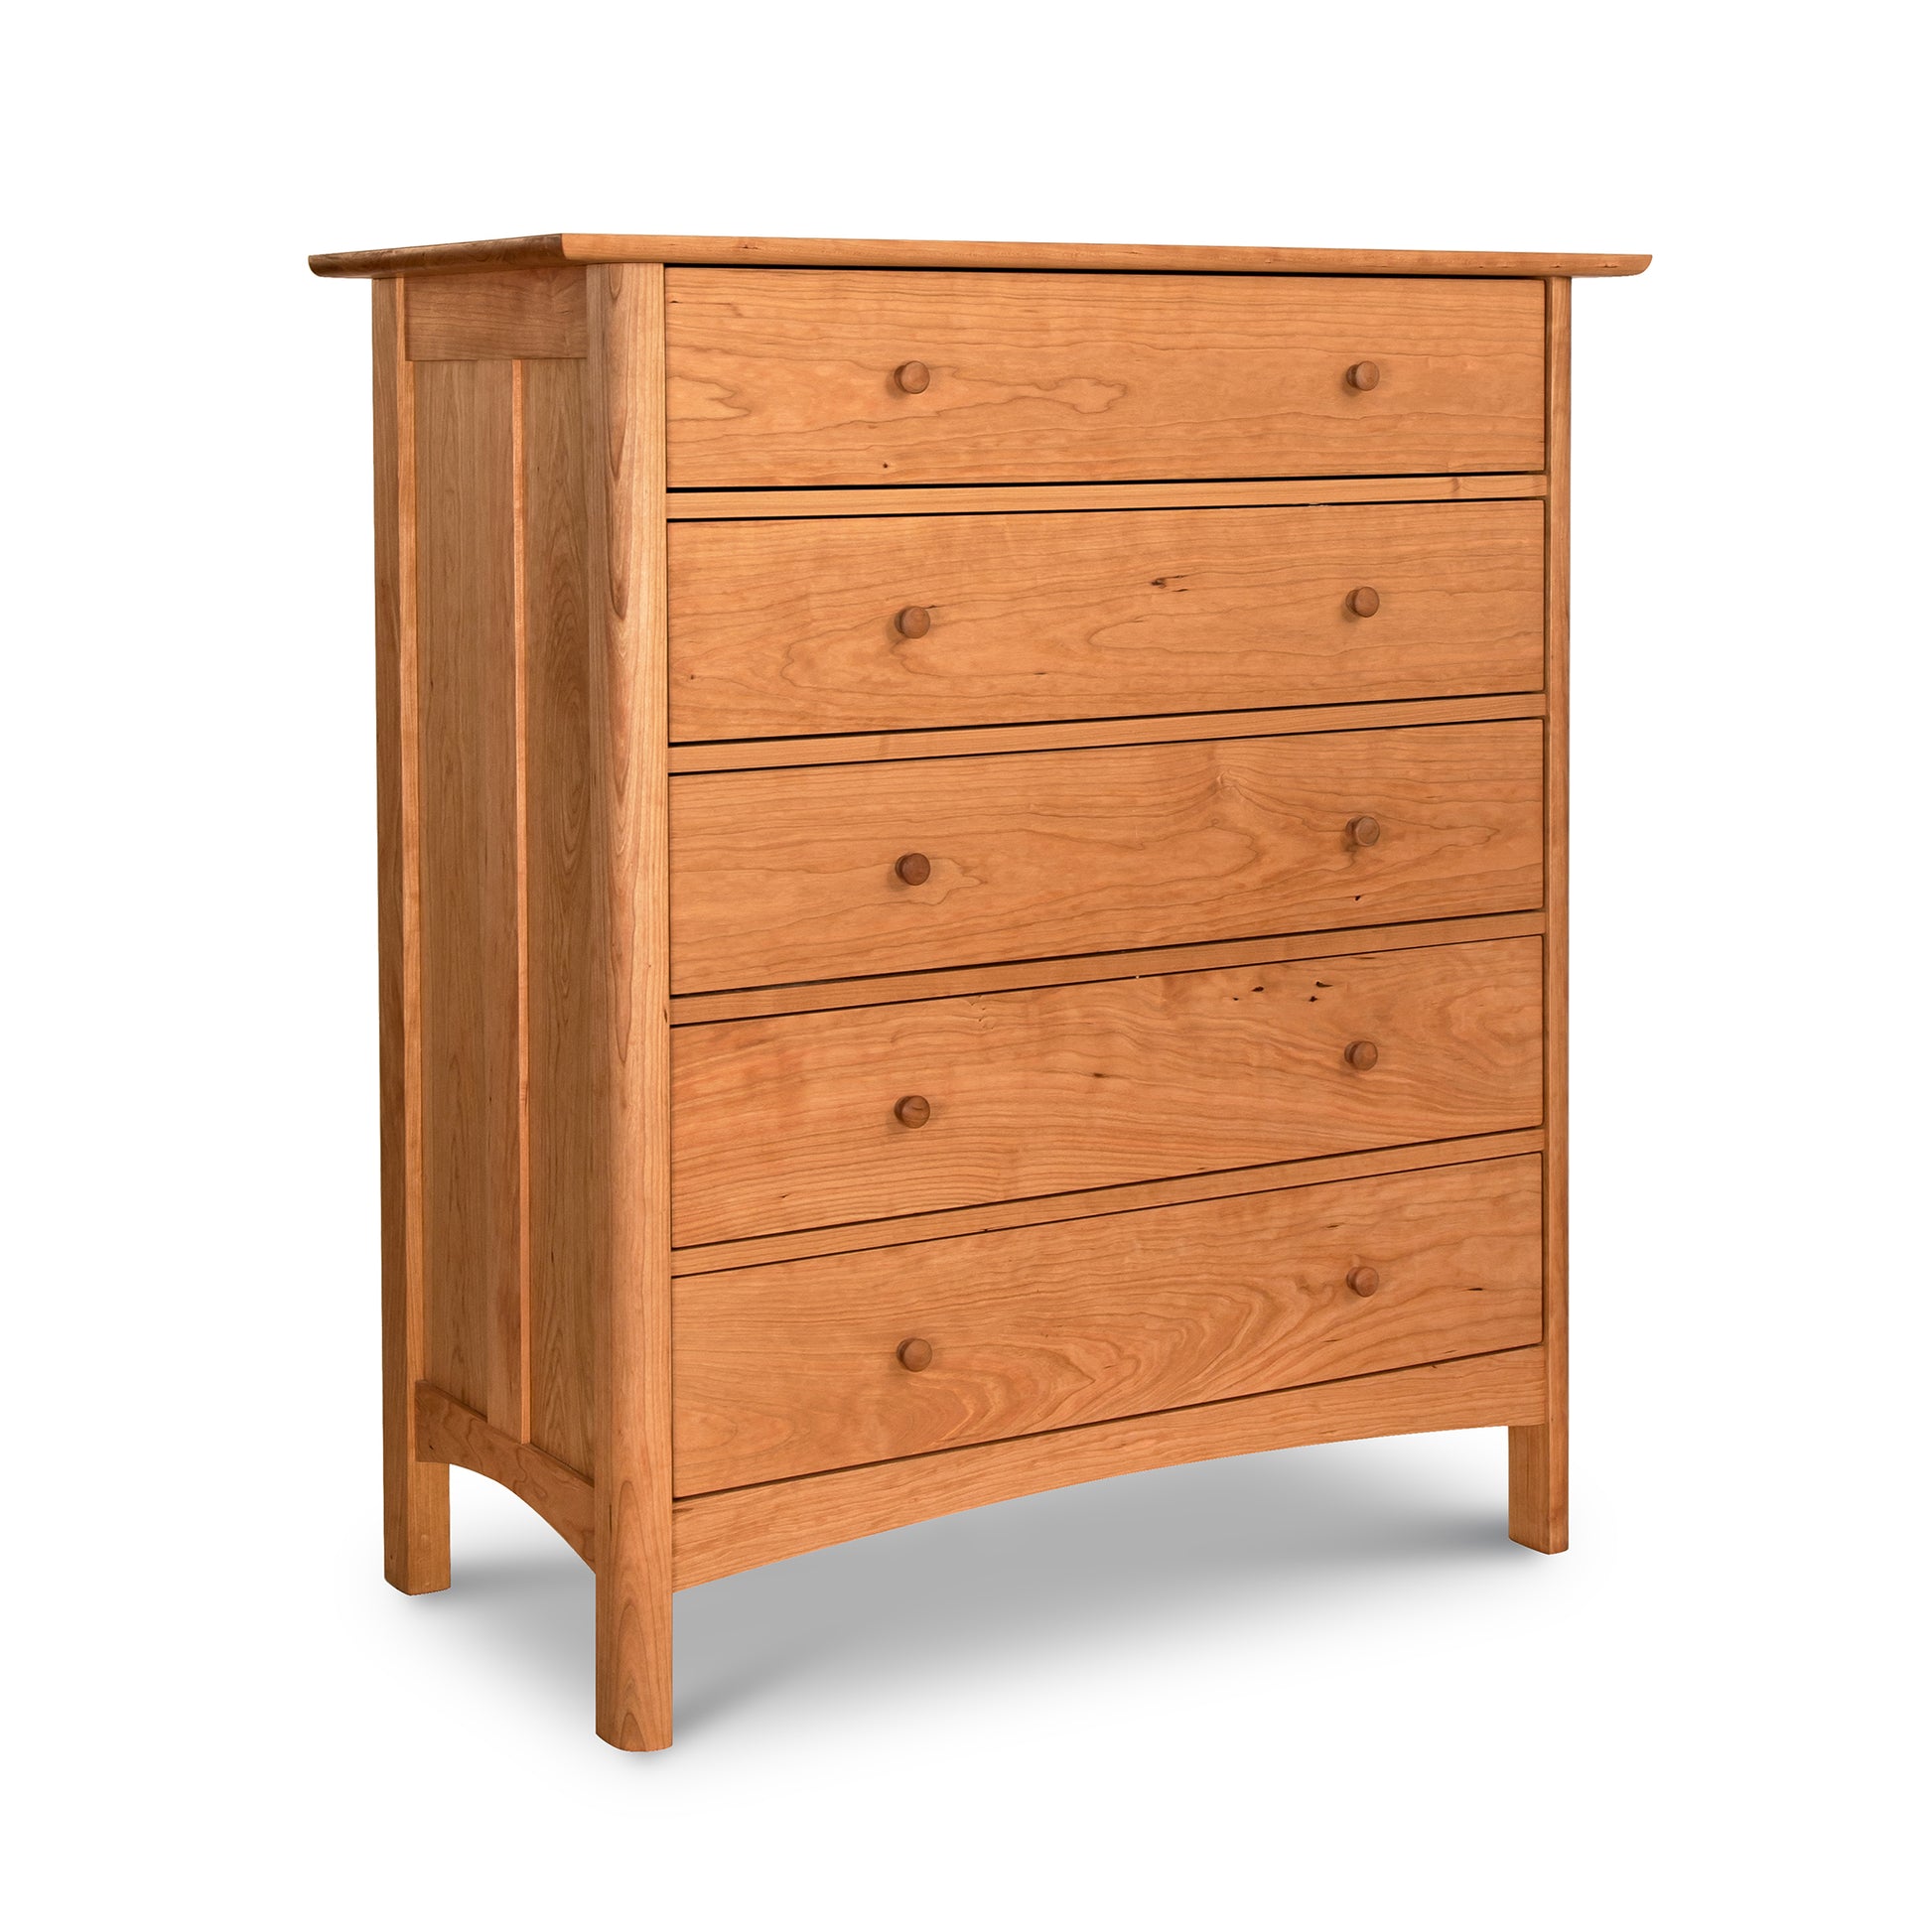 A Vermont Furniture Designs Heartwood Shaker 5-Drawer Chest on a white background.